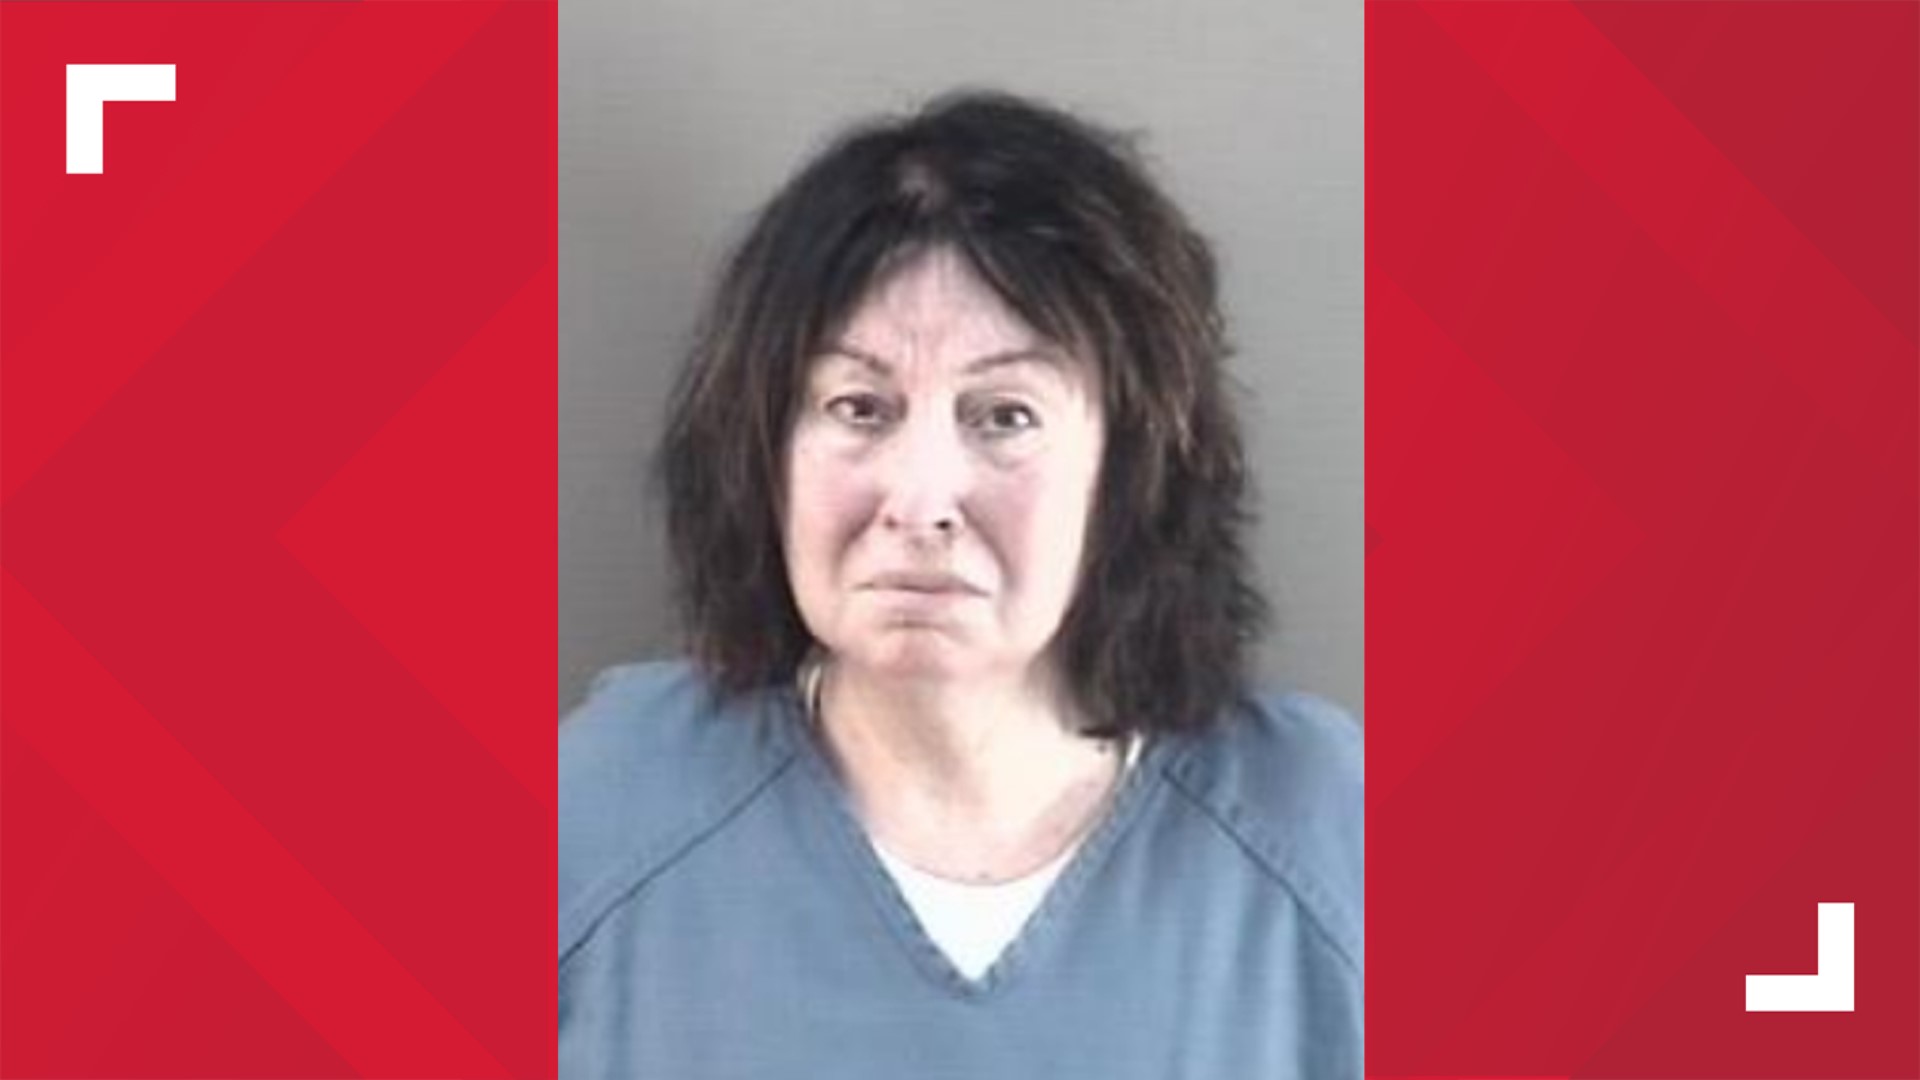 A Wood County jury convicted Linda Greene on multiple charges, including aggravated theft.